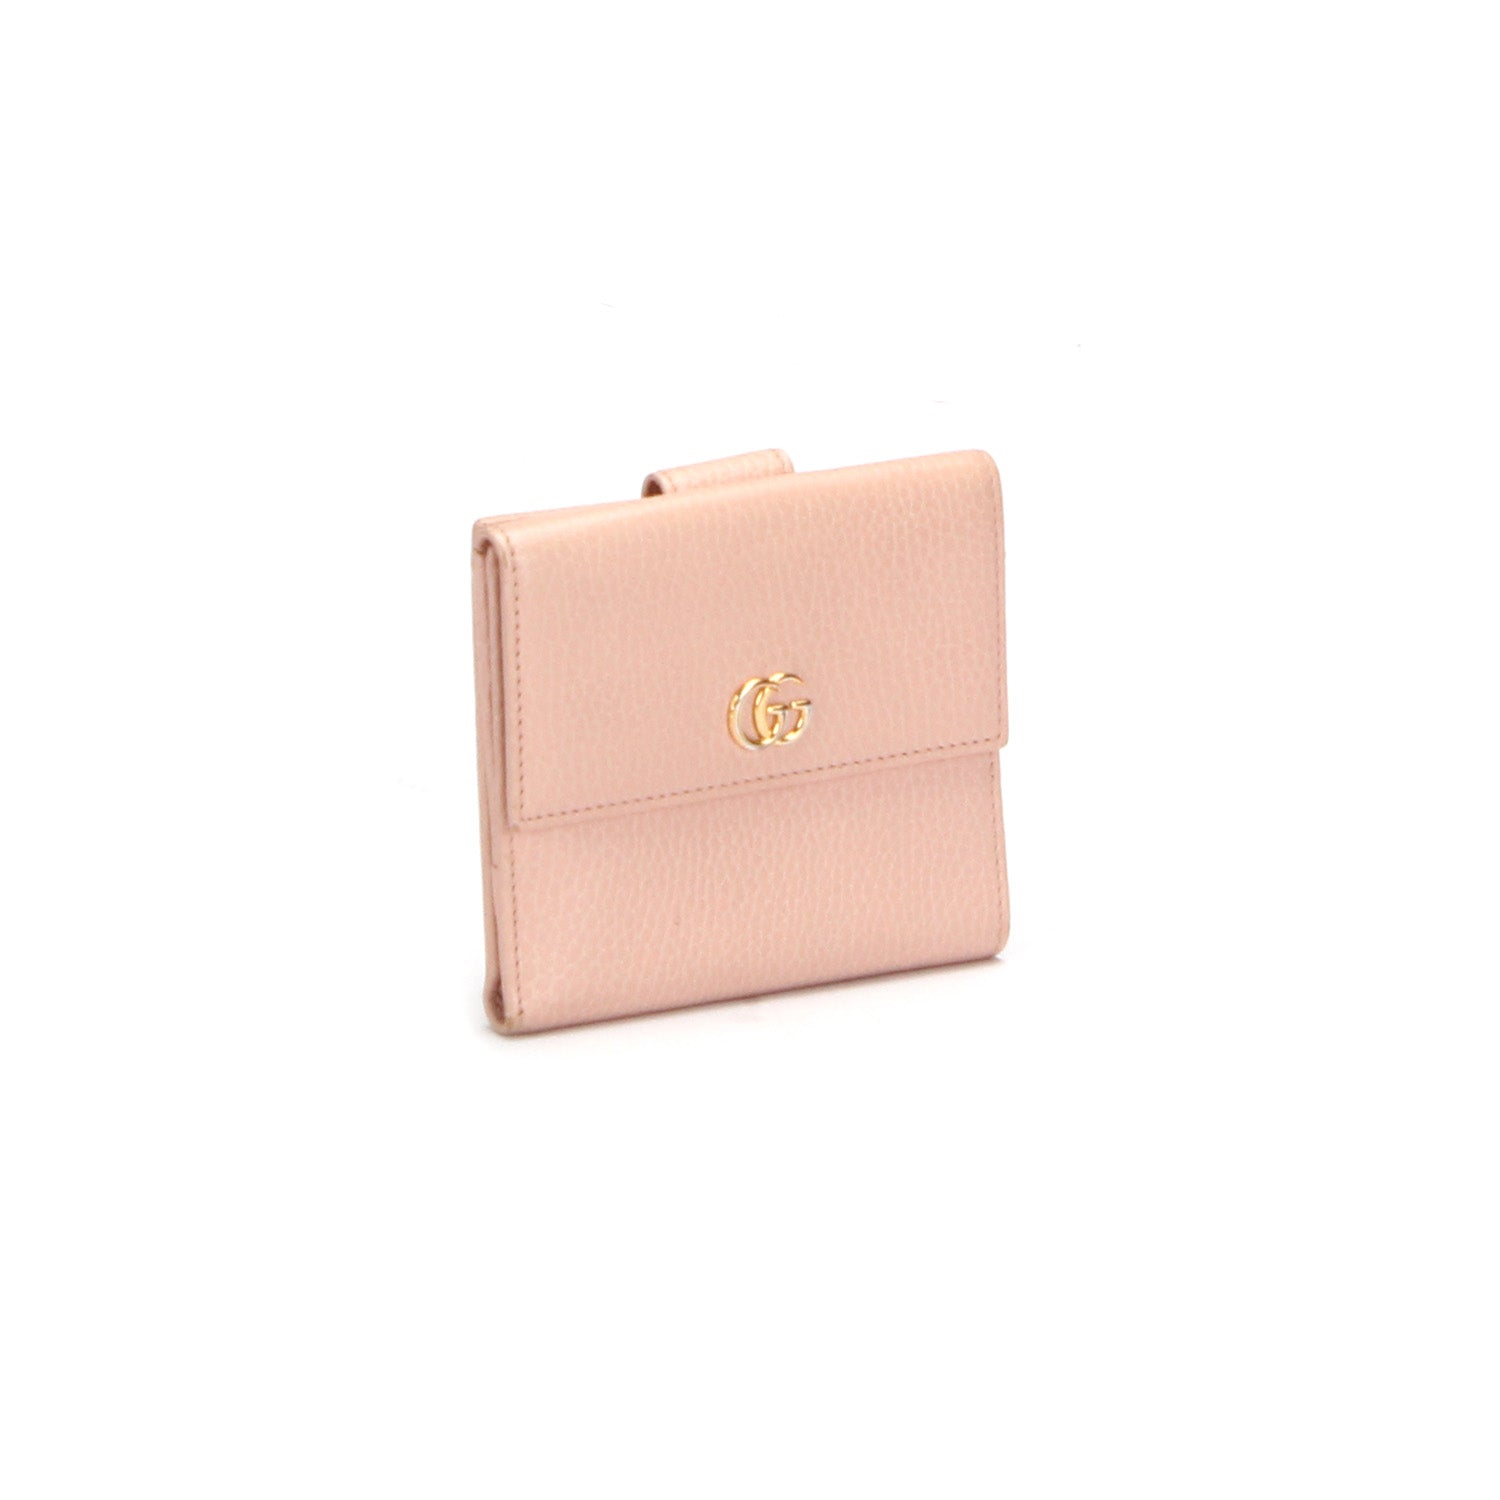 GG Marmont French Flap Wallet 456122